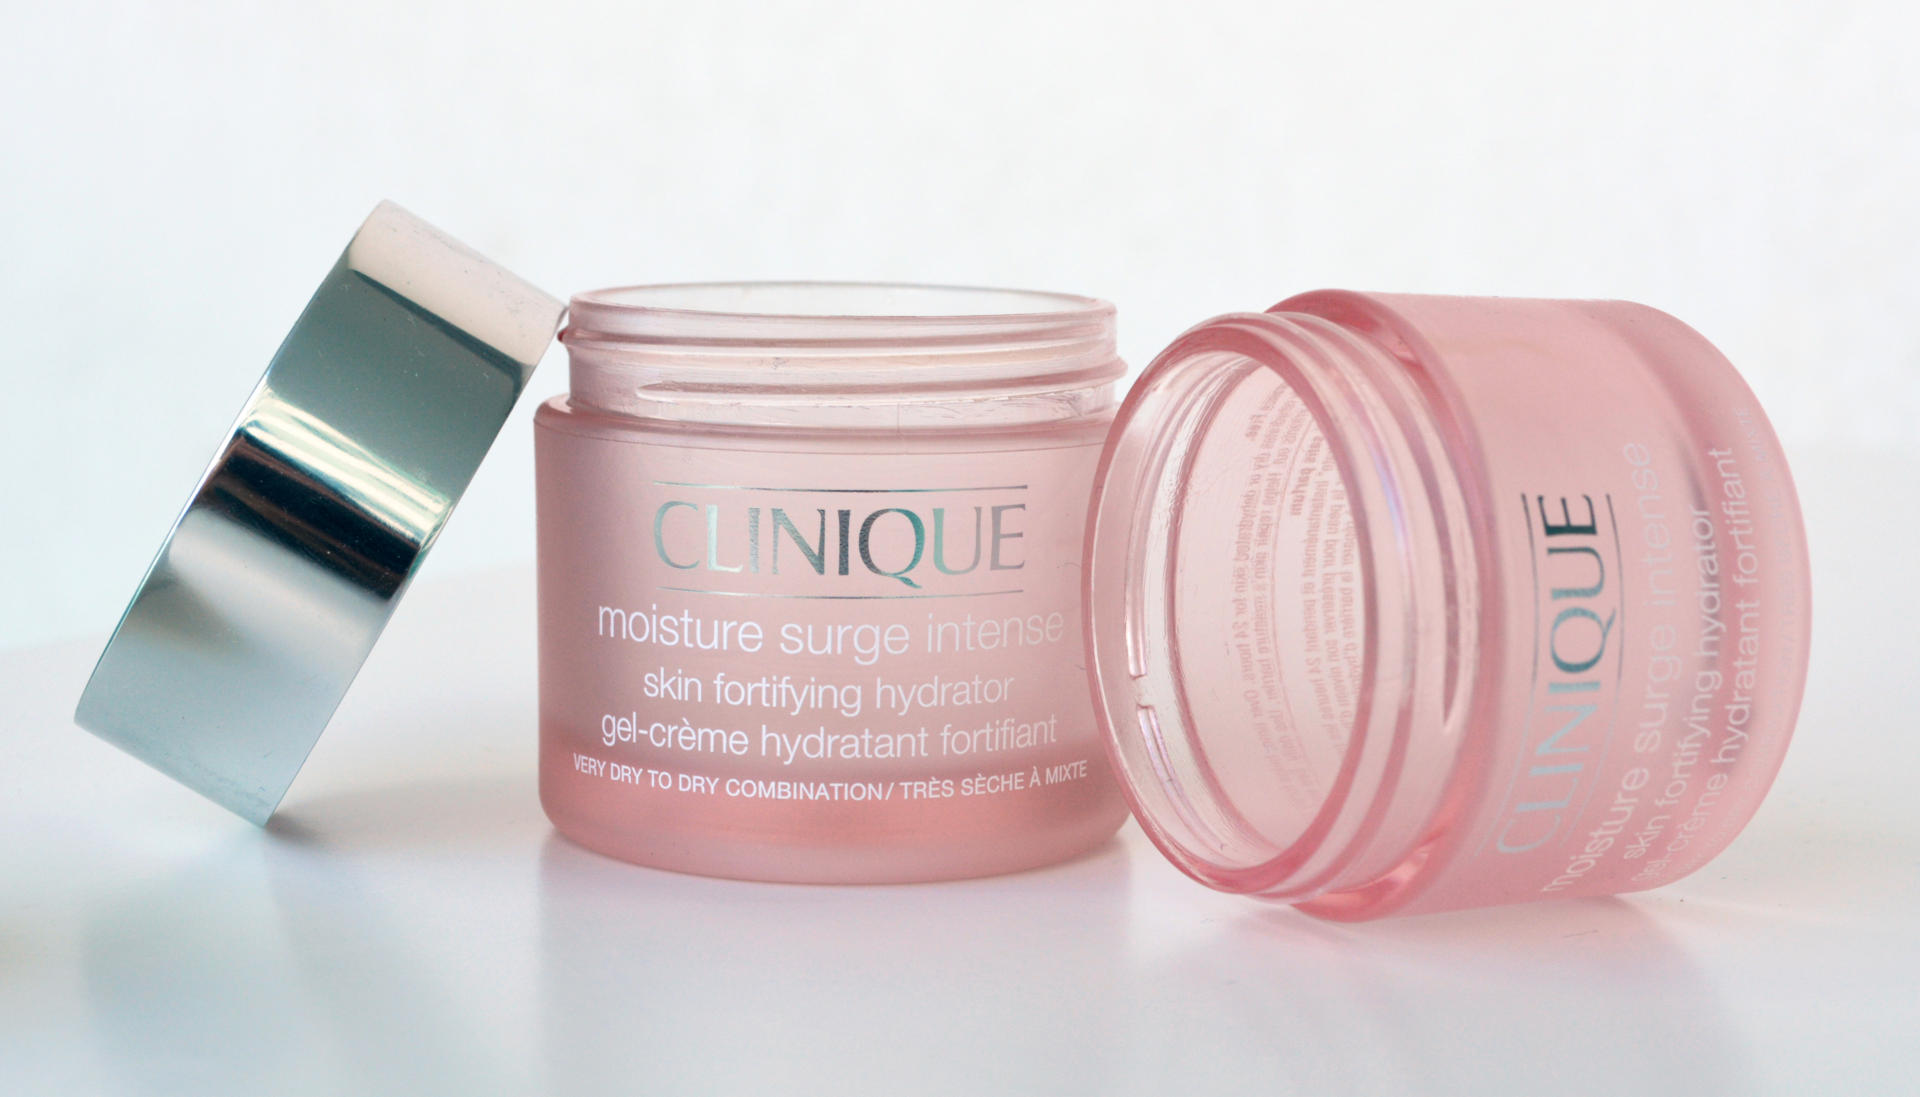 Clinique's Moisture Surge Intense Skin Fortifying Hydrator